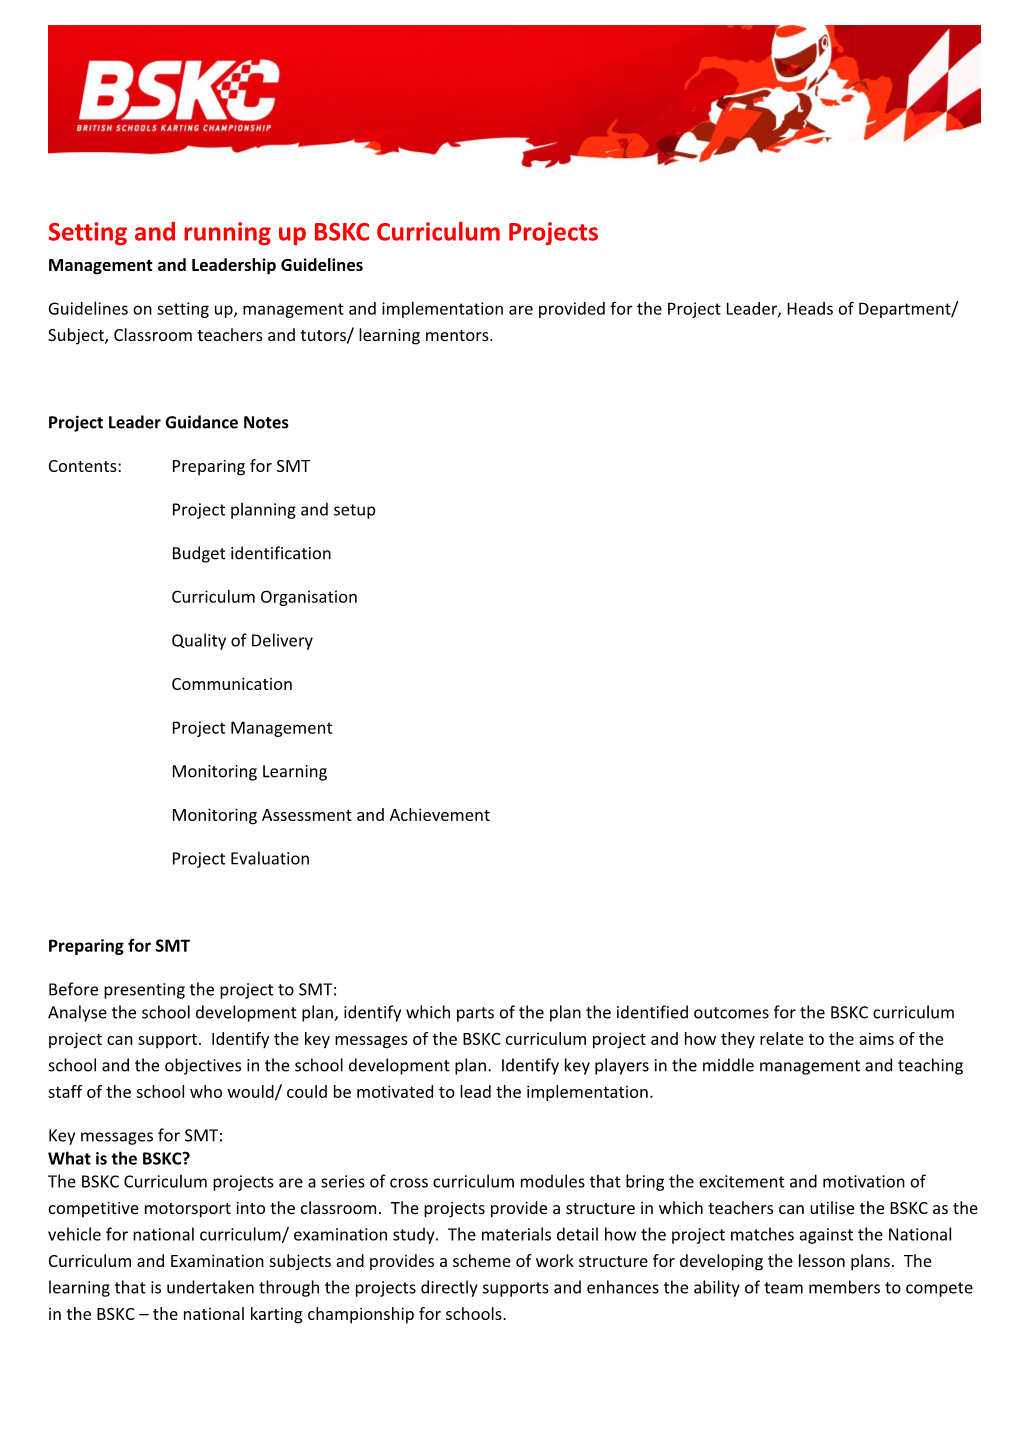 Setting and Running up BSKC Curriculum Projects